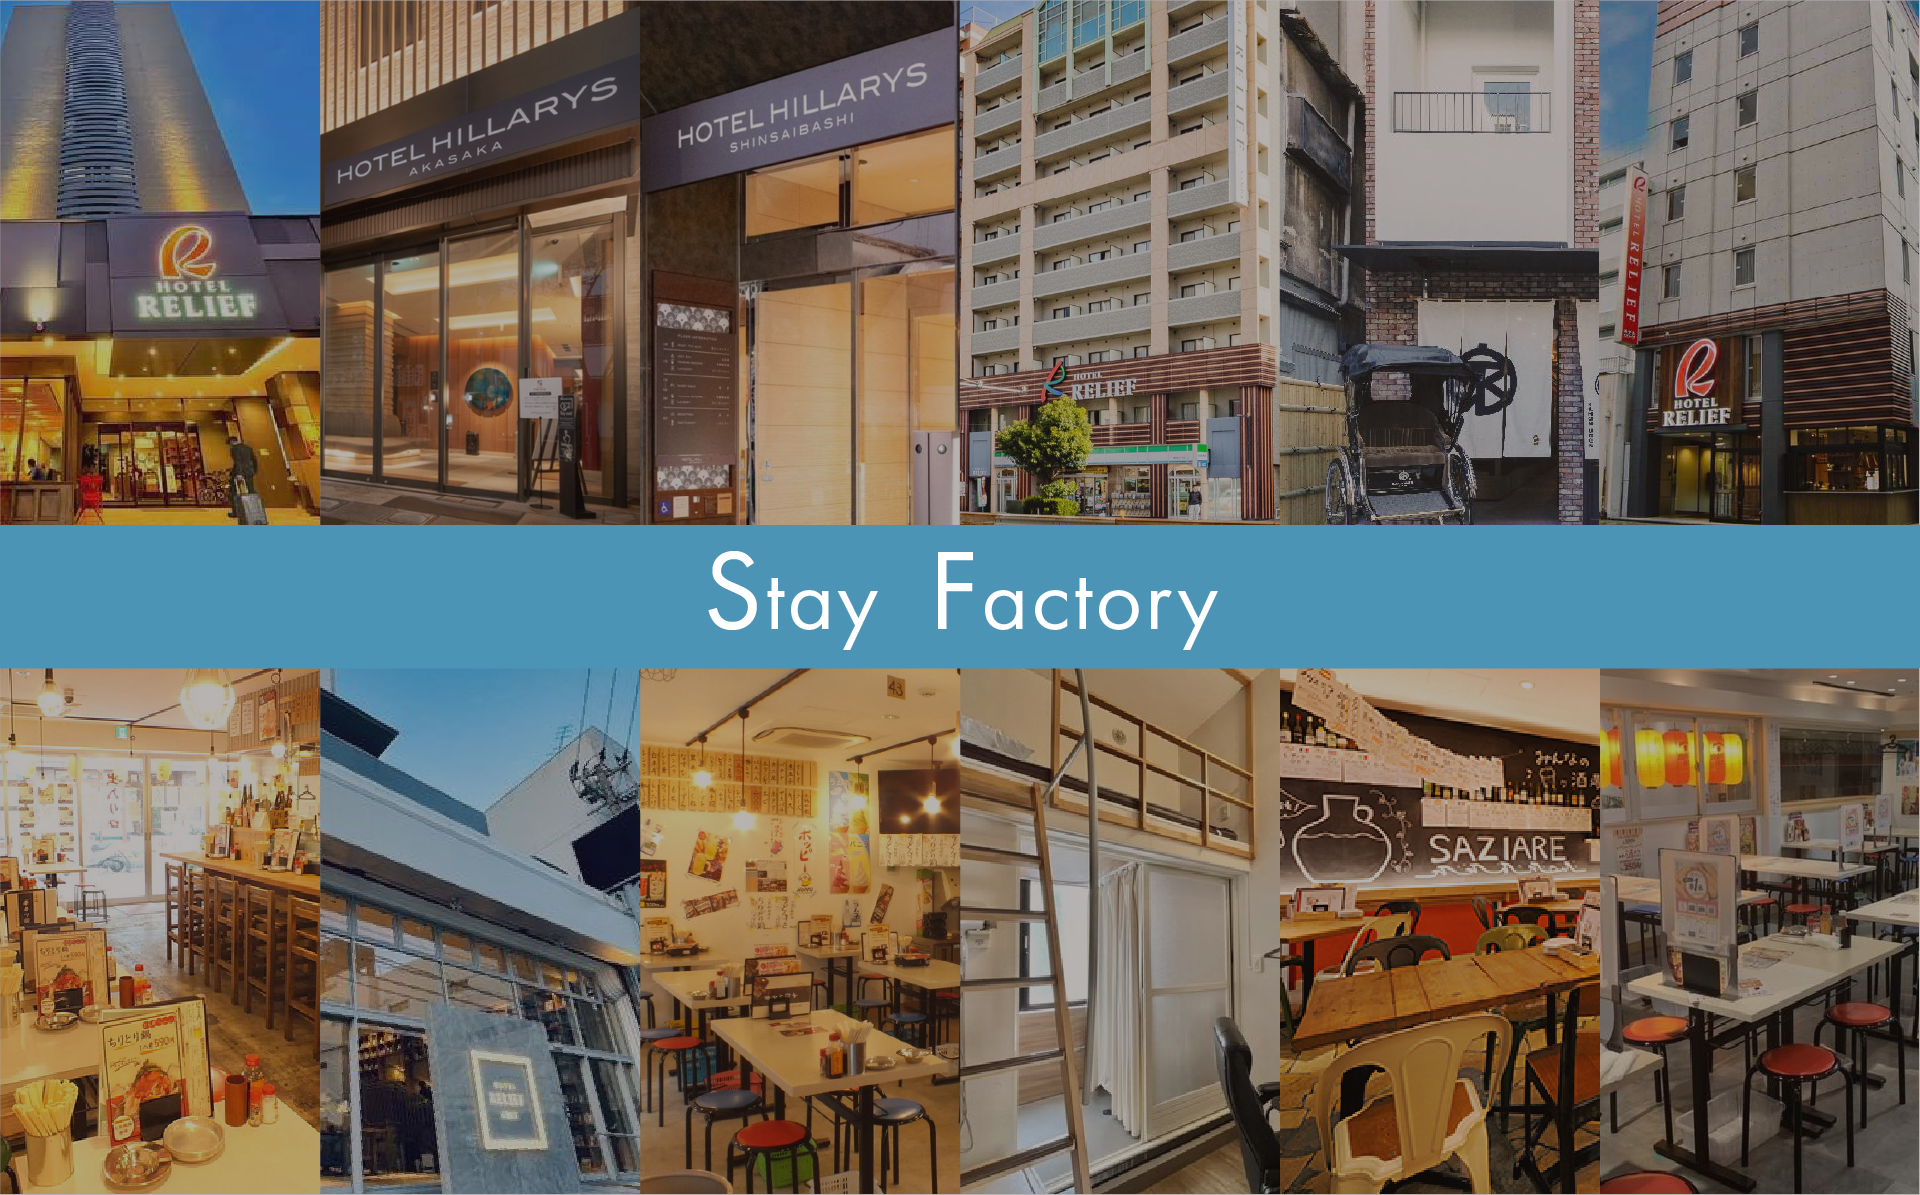 Stay Factory